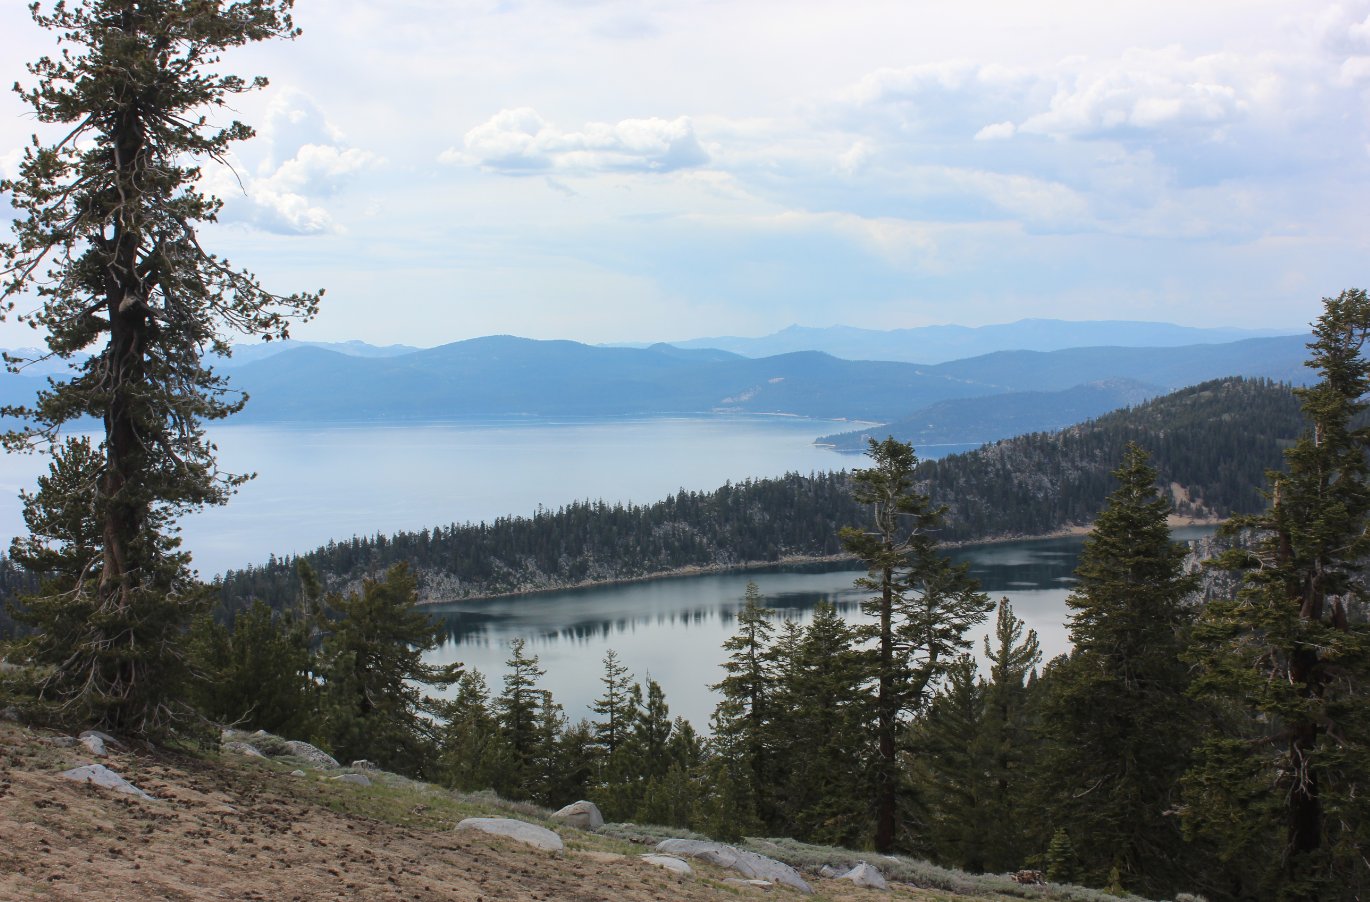 Another Marlette Viewpoint